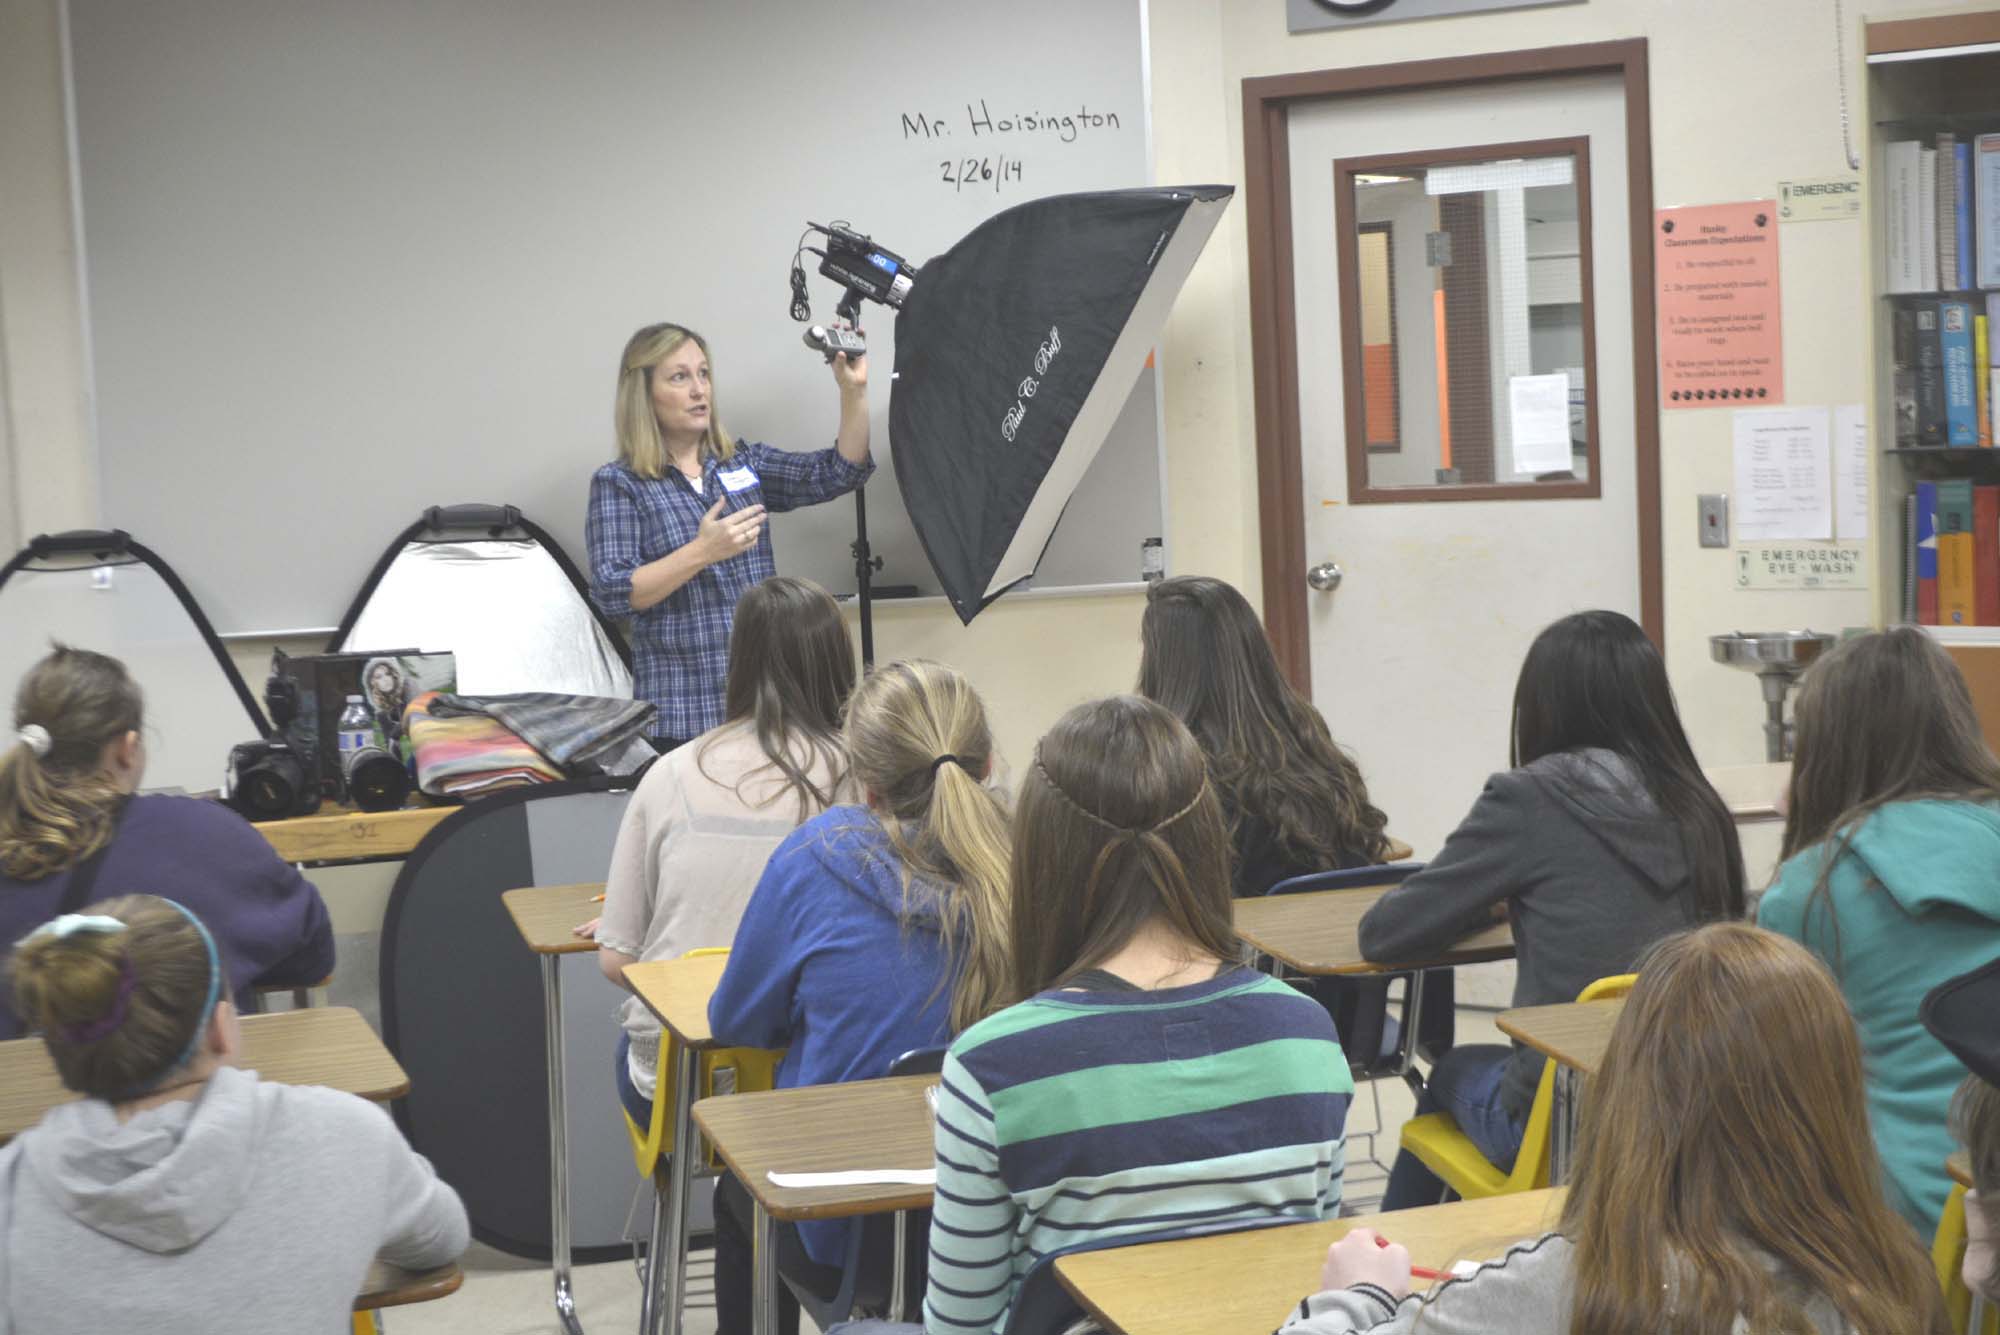 Photographer Debbie Rodgers demonstrates some picture taking techniques during a career fair at Jemtegaard Middle School recently.